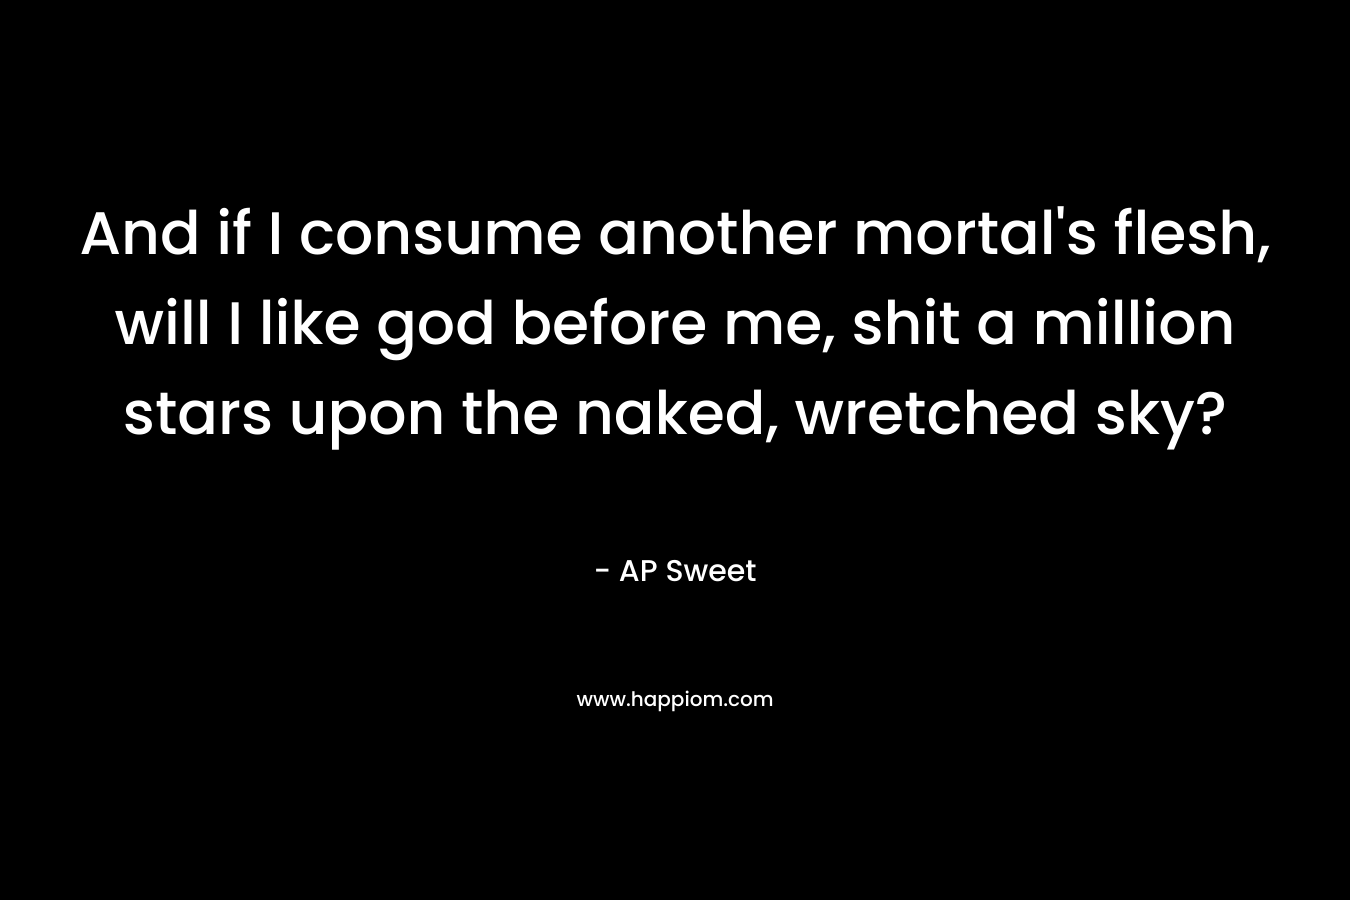 And if I consume another mortal’s flesh, will I like god before me, shit a million stars upon the naked, wretched sky? – AP Sweet